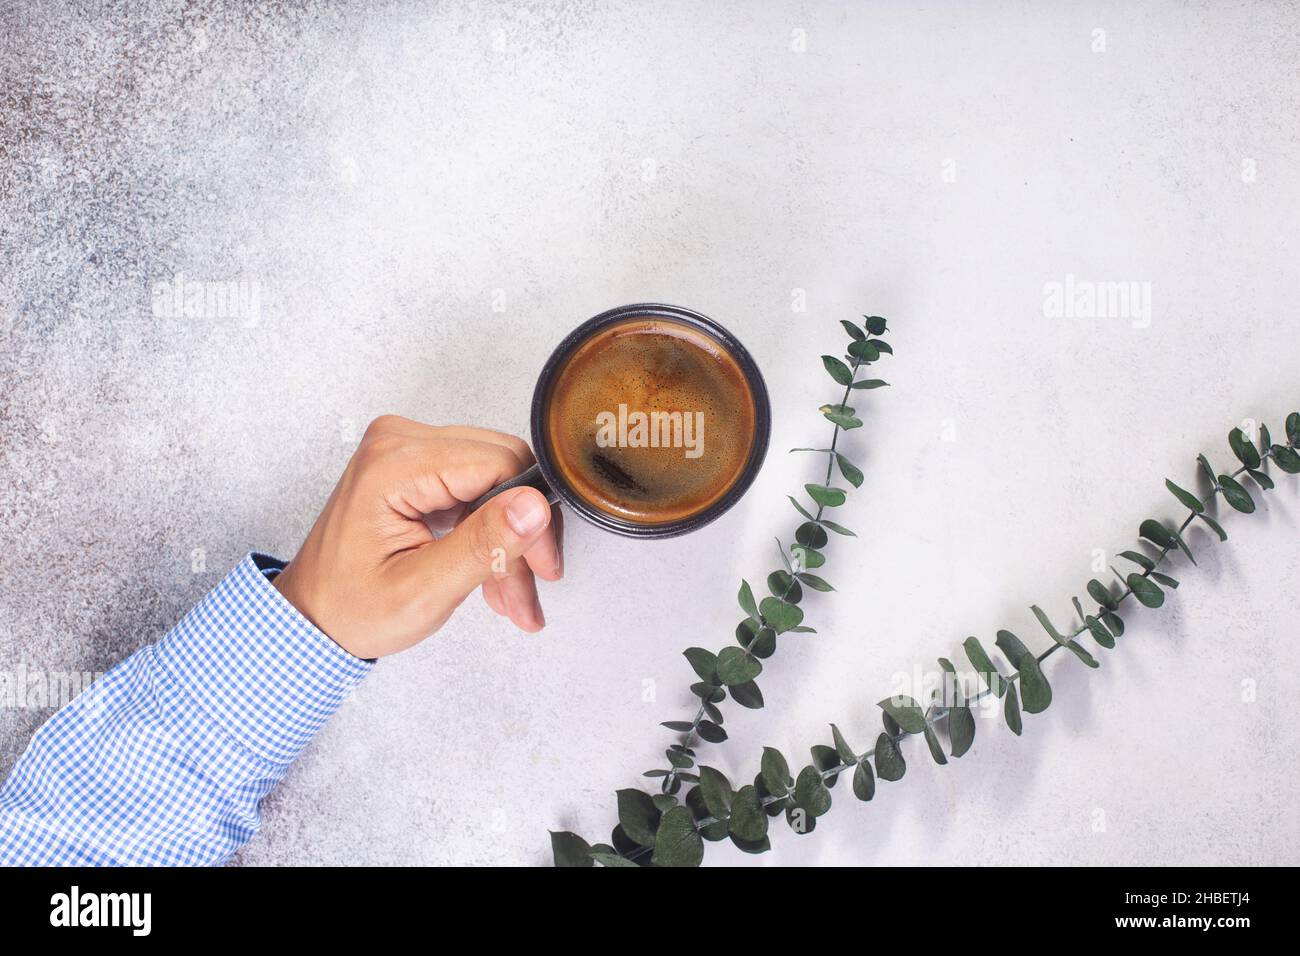 man hand holds a cup of coffee on grey table eucalyptus leaves Stock Photo